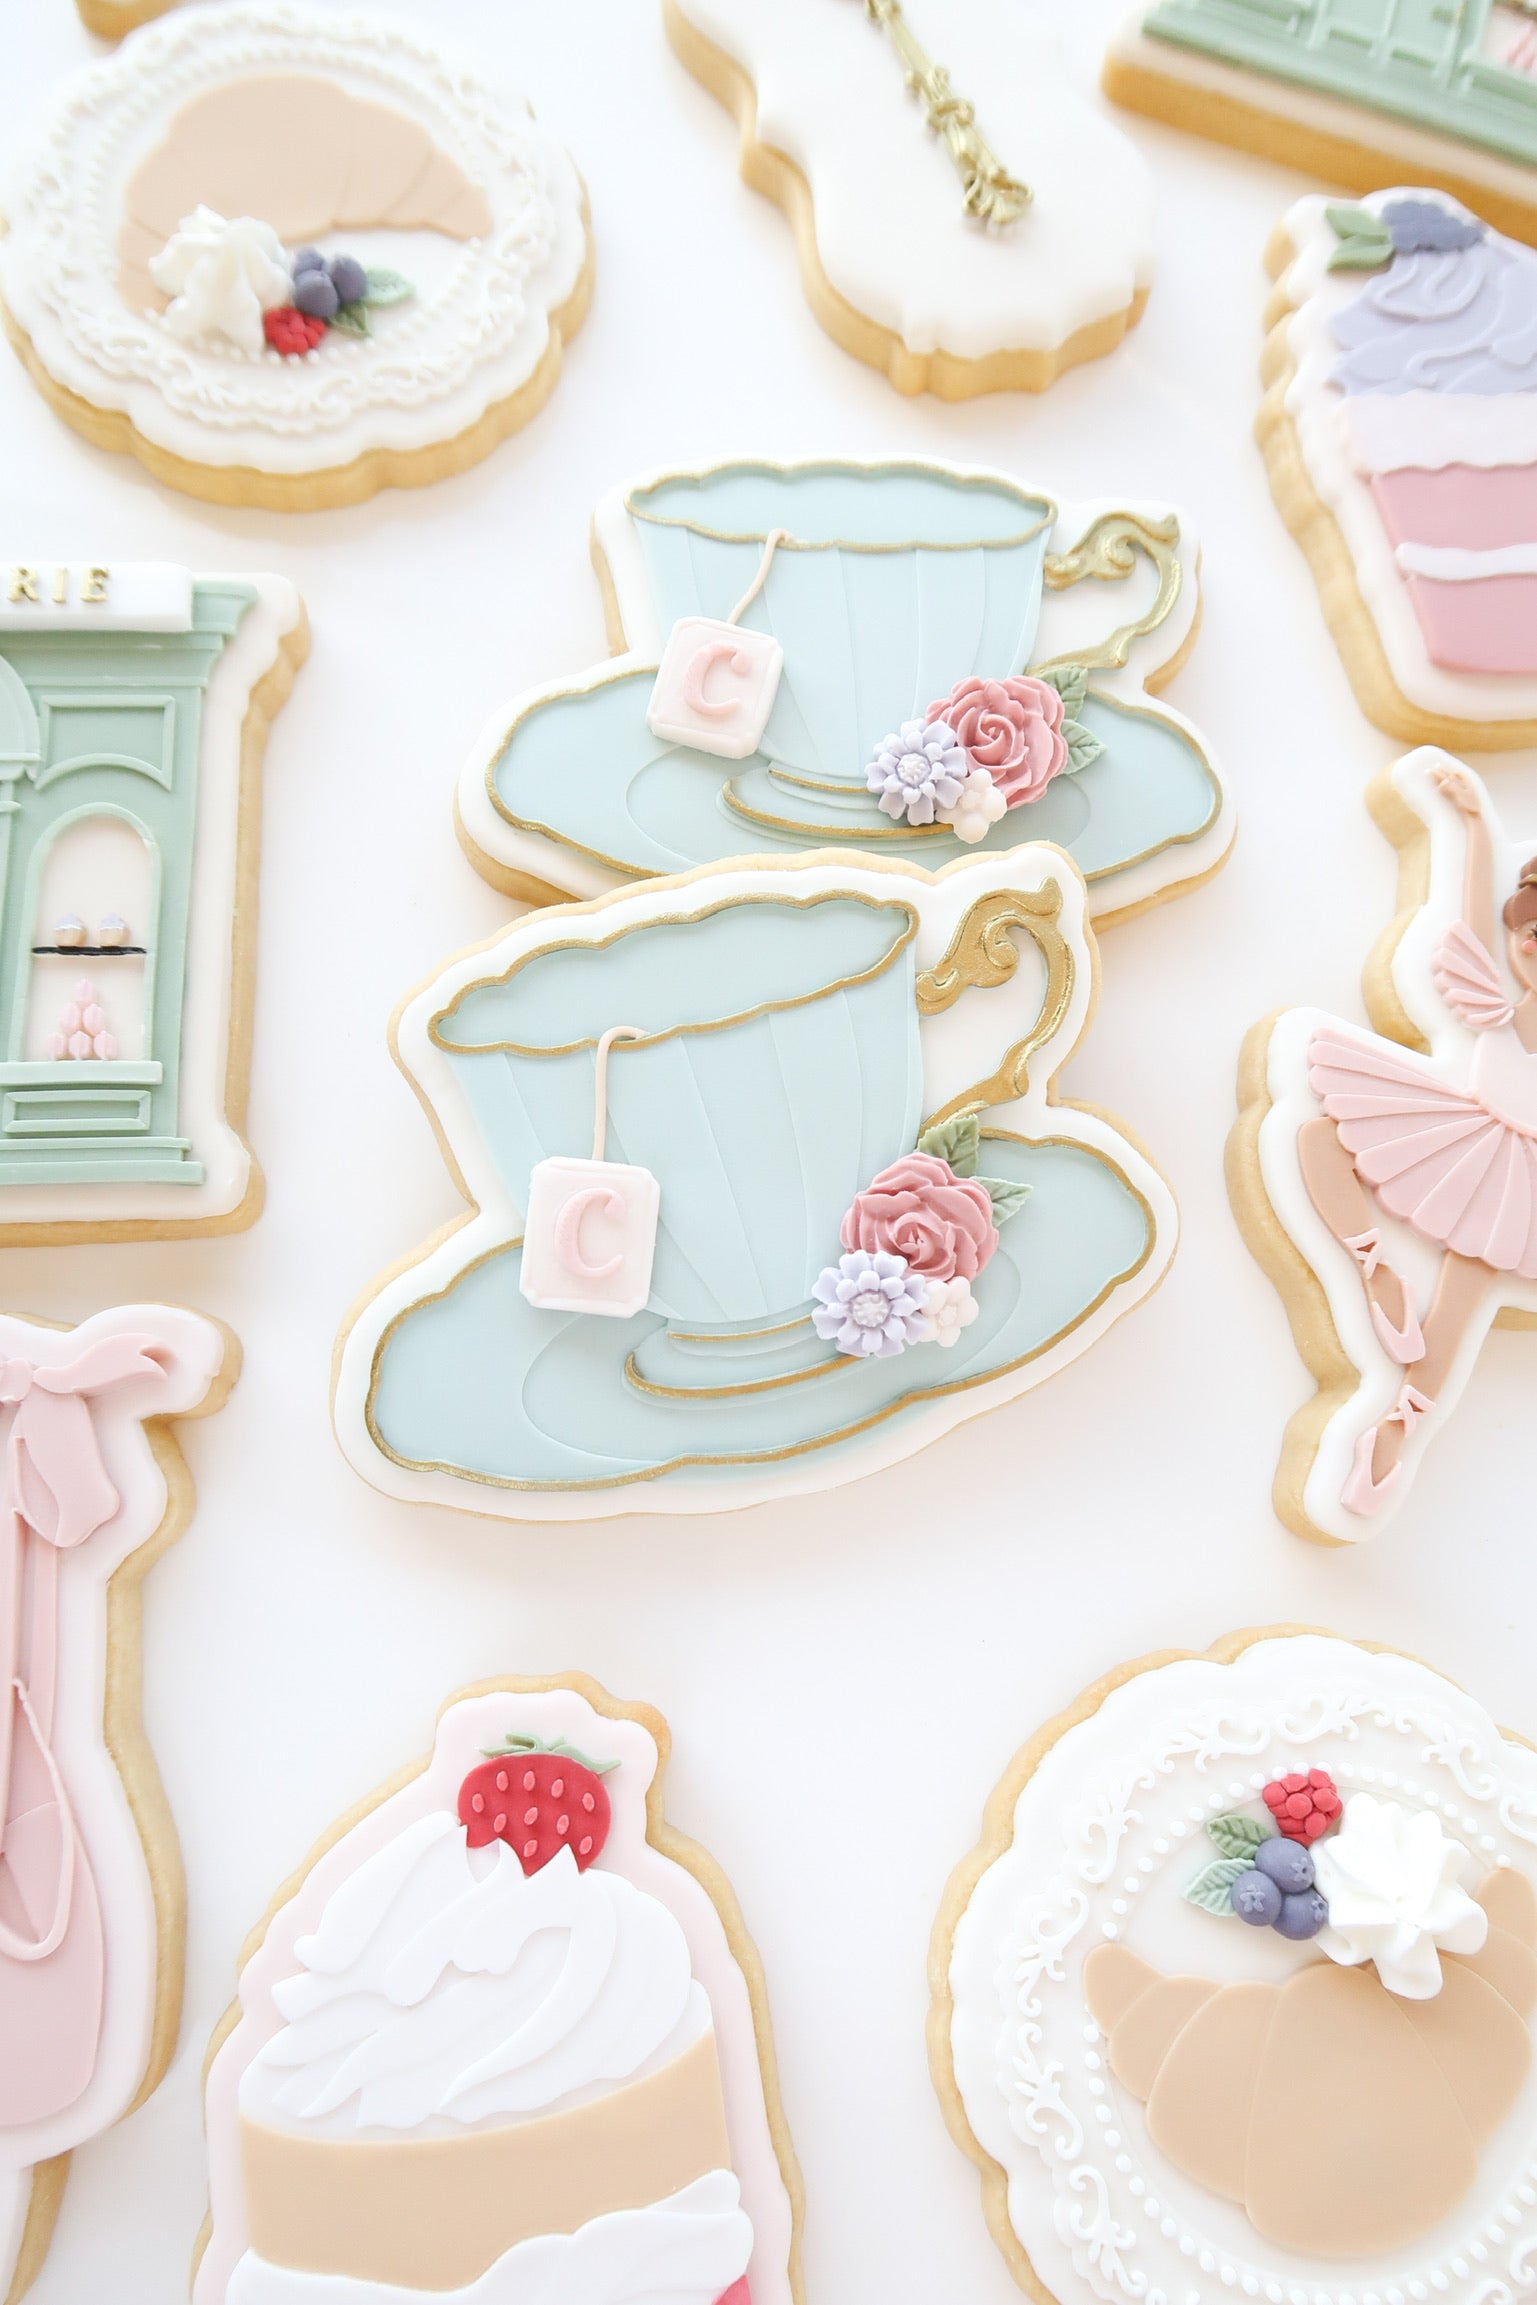 Tea Party Themed Sugar Cookies